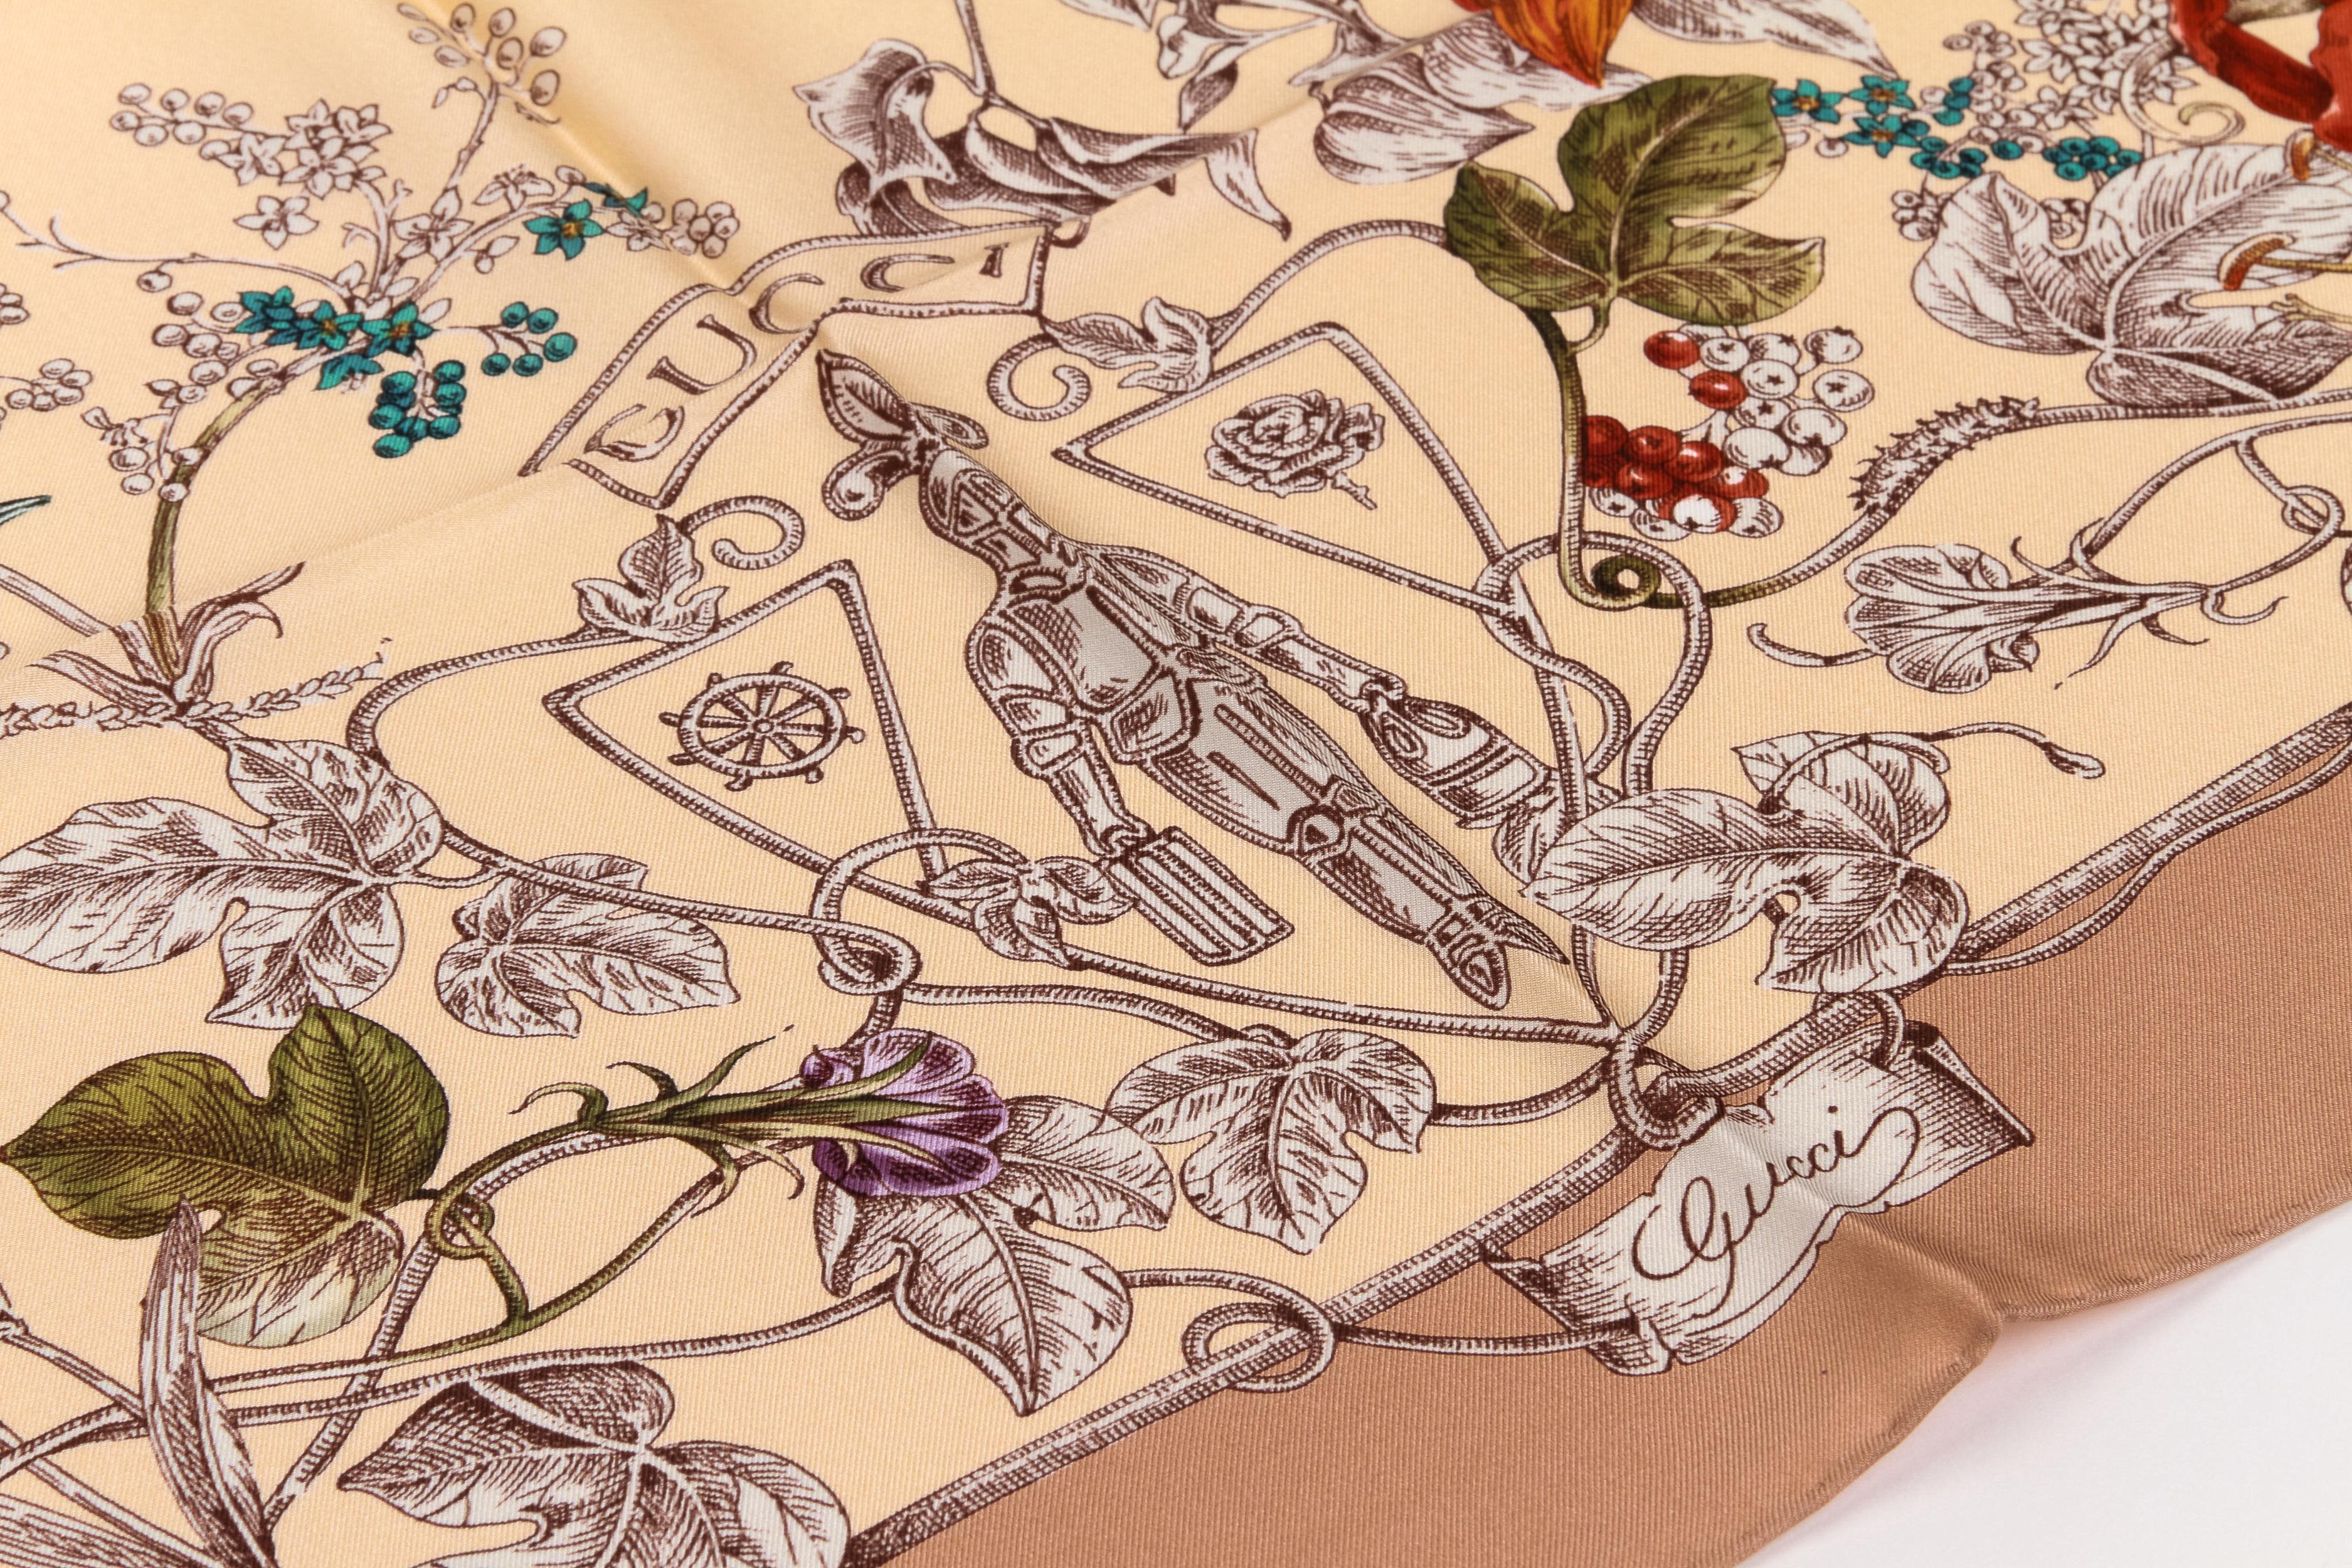 New Gucci Floral Bird Silk Scarf in beige and caramel tones. Original label and care tag.
100% Silk.
35X 35